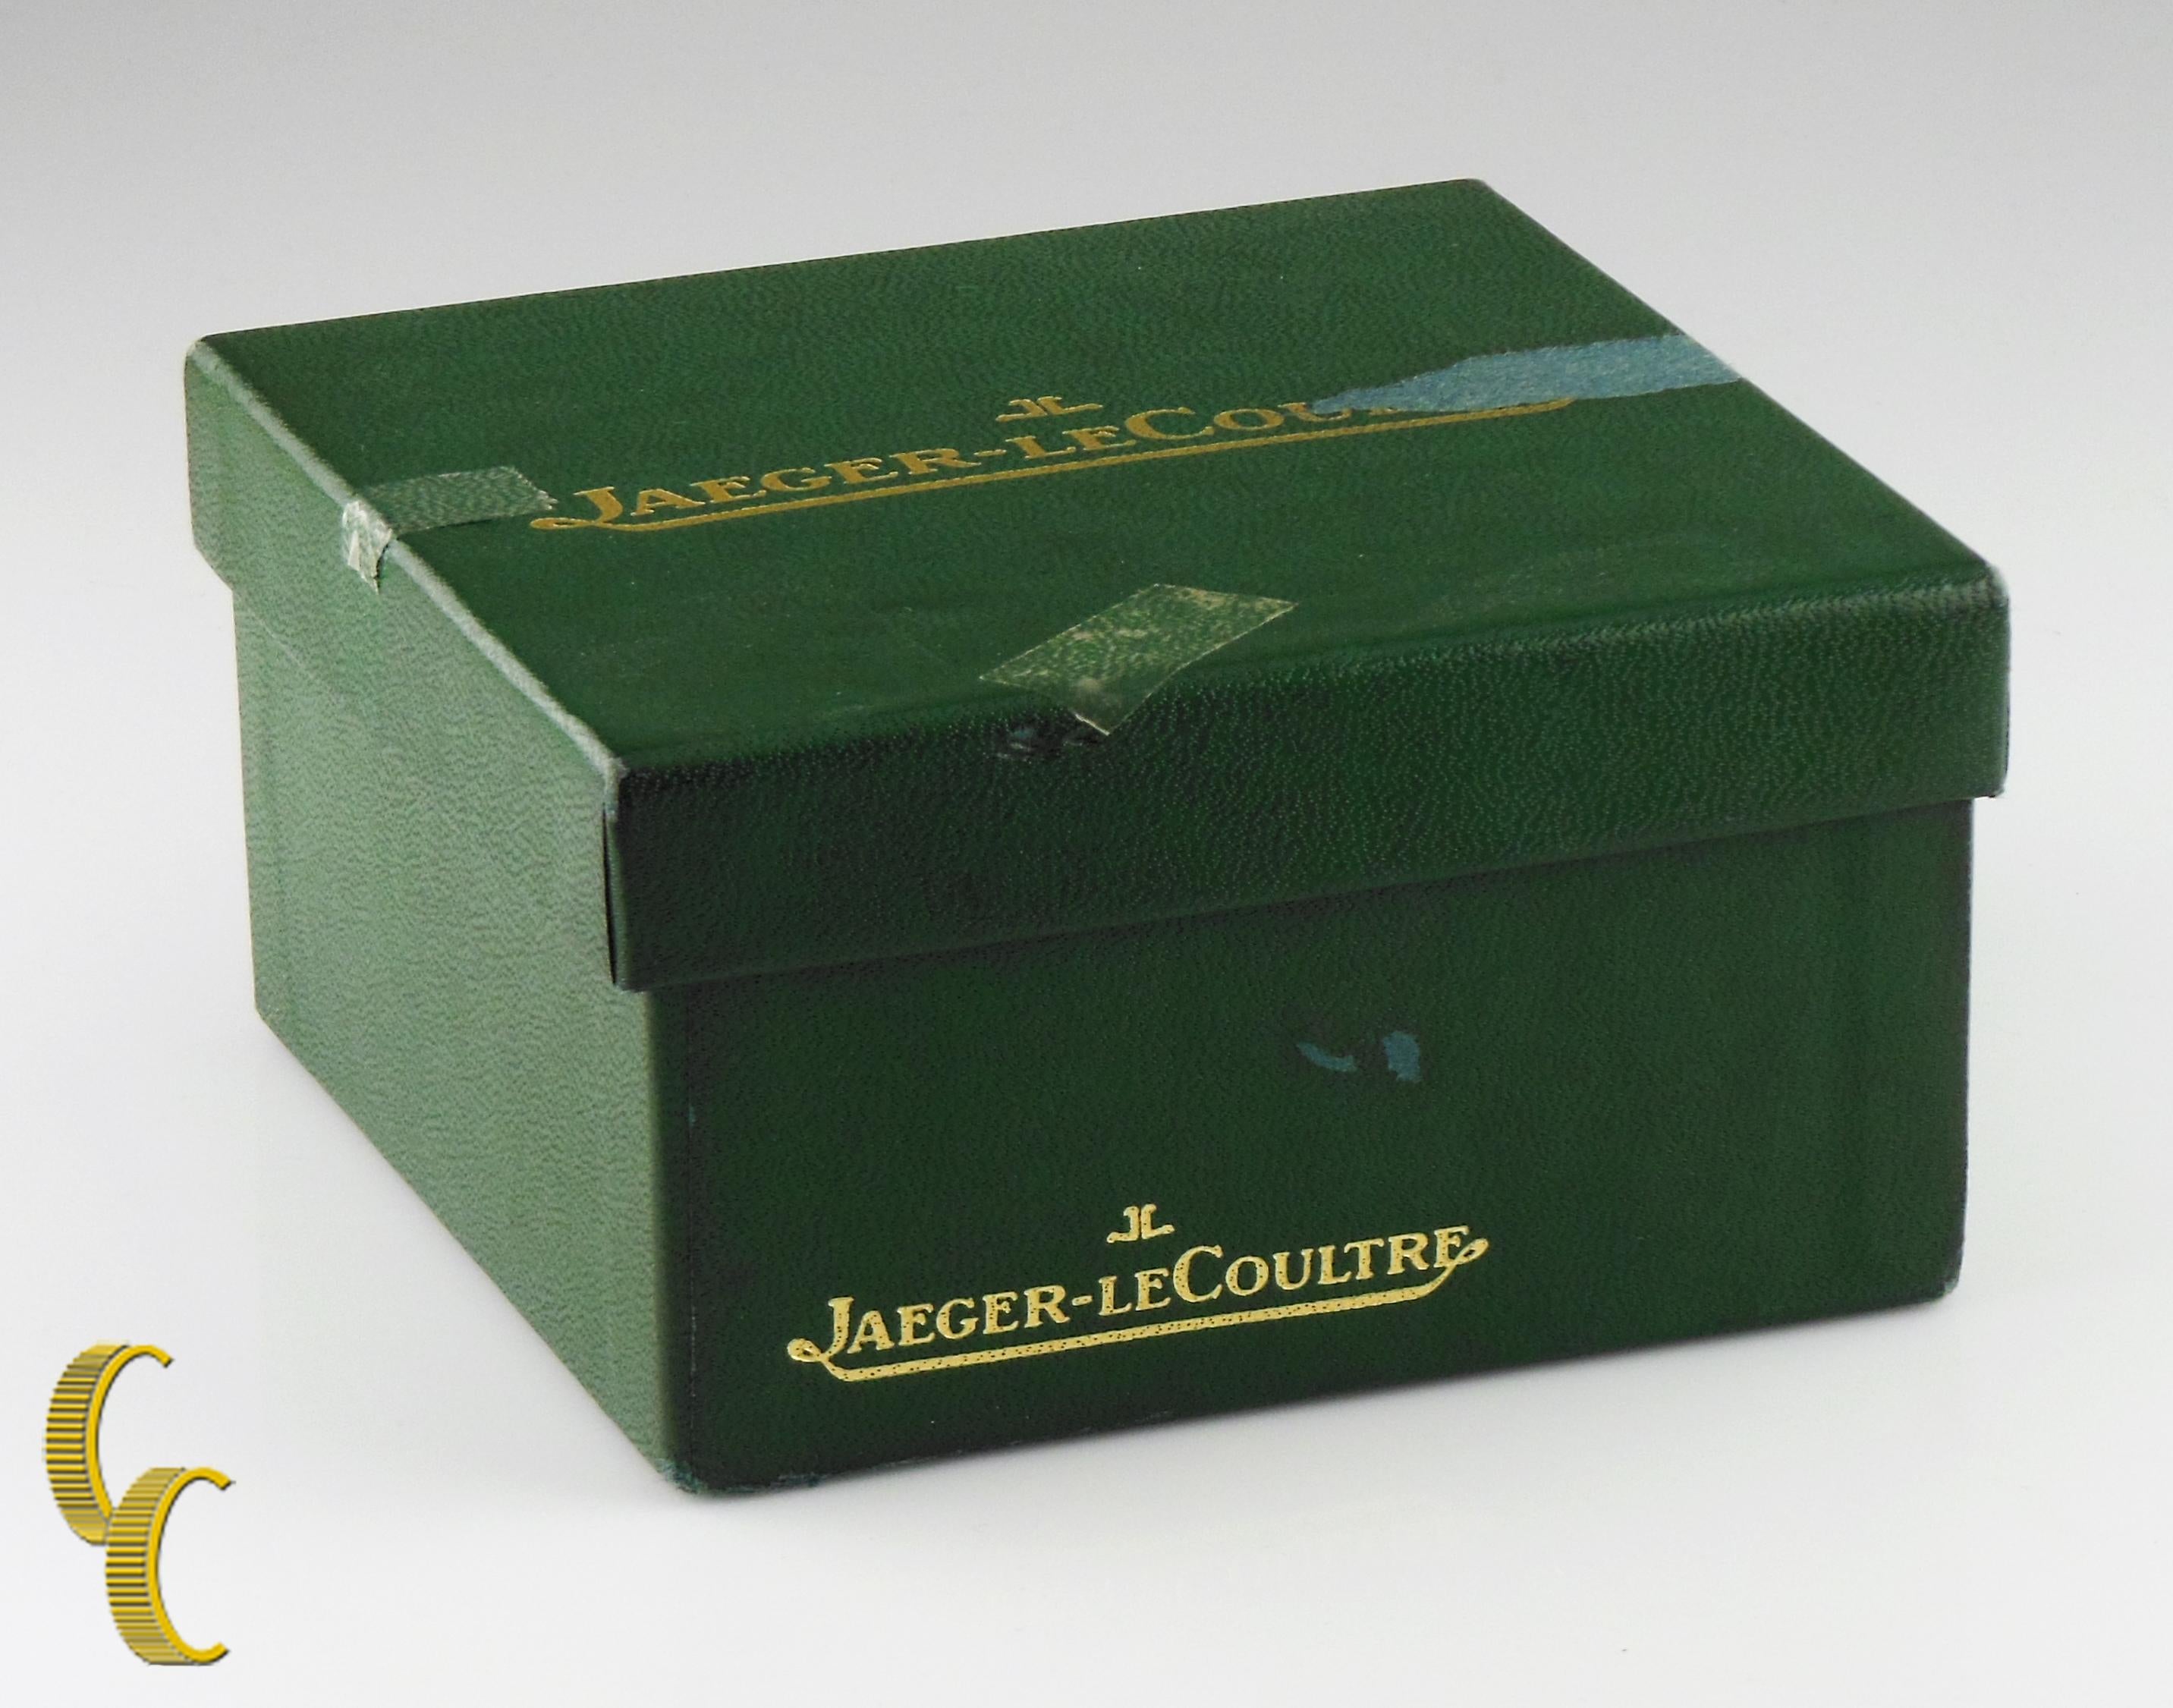 Jaeger-LeCoultre Vintage Hand-Winding Alarm Watch W/ Original Box and Case For Sale 1